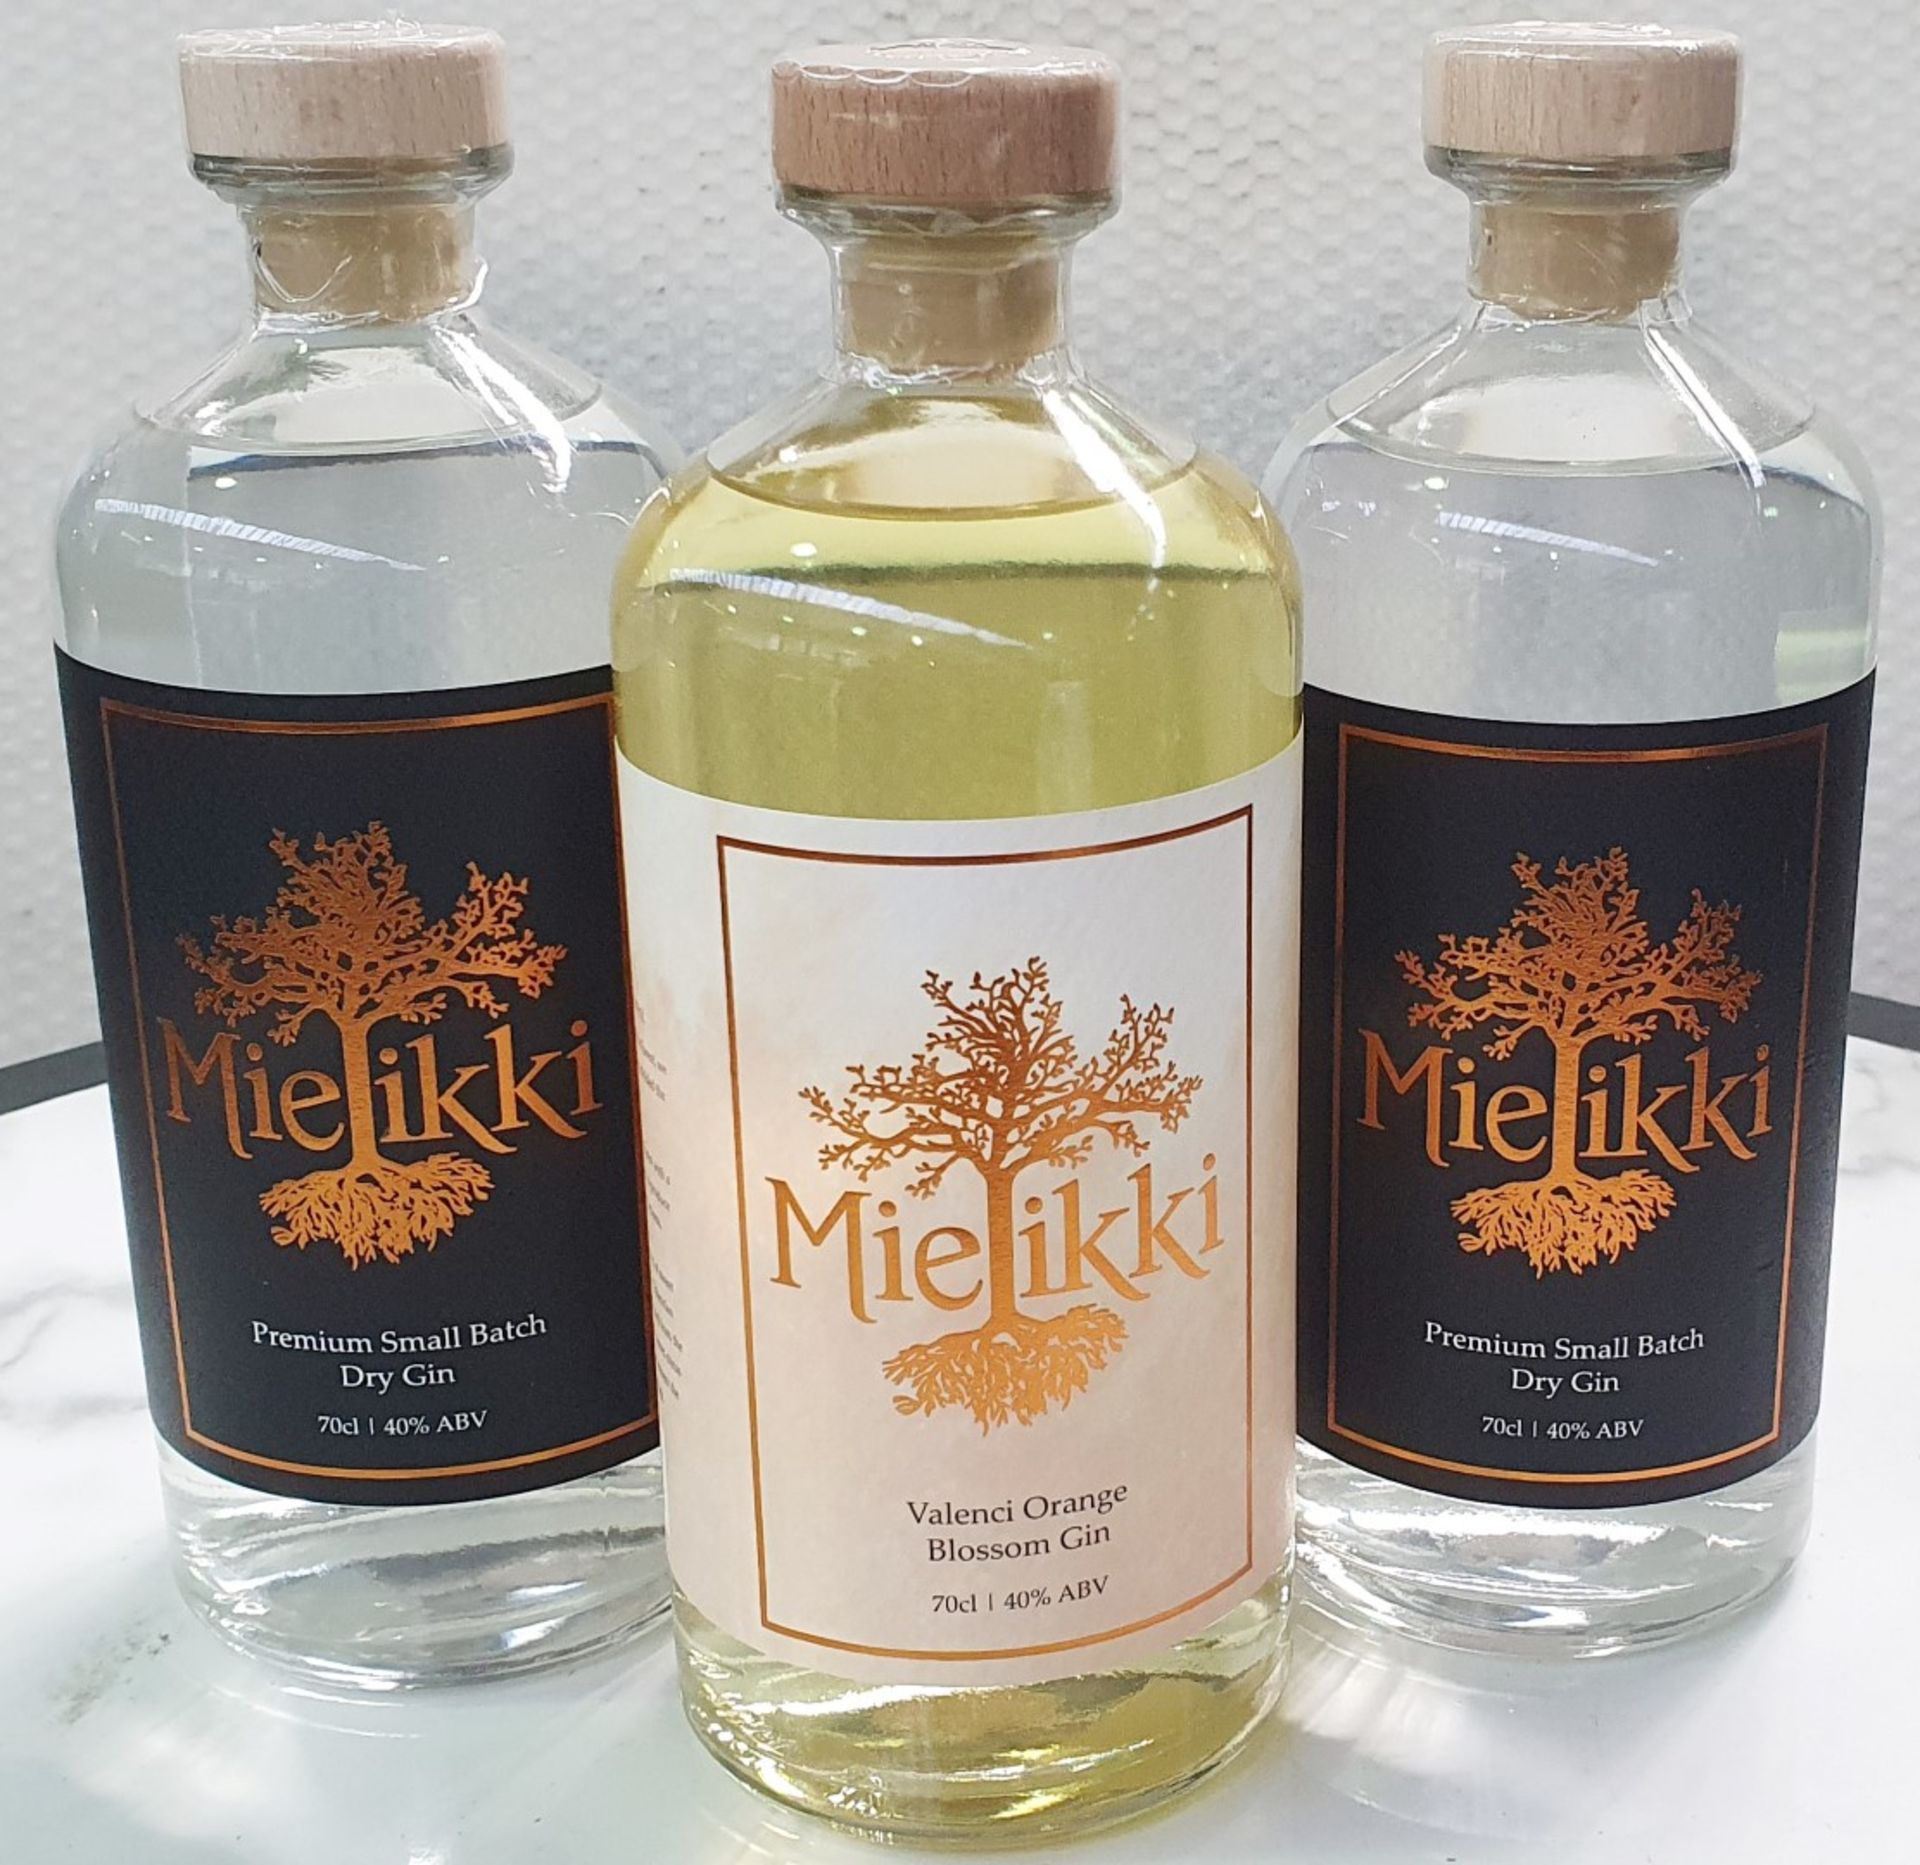 3 x Bottles of 70cl Mielikki Gin - Includes Premium Small Batch Dry Gin and Valenci Orange